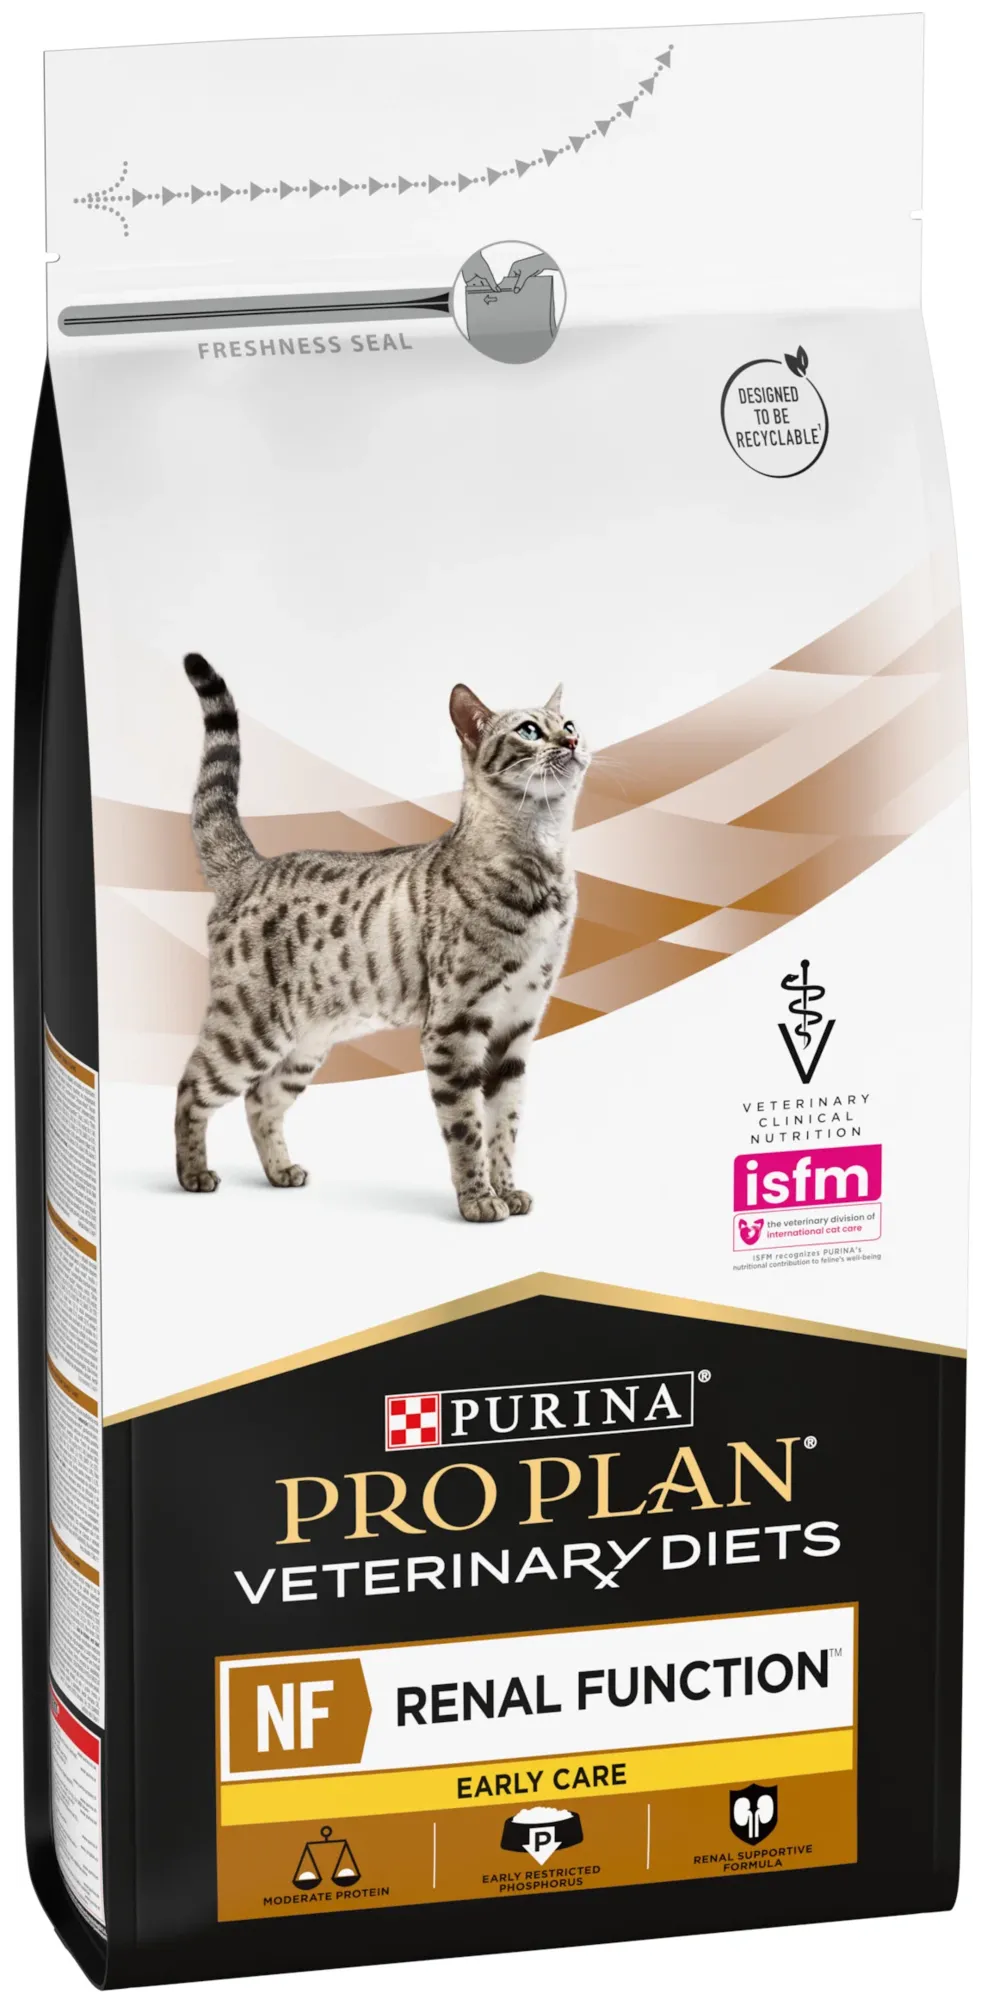 Purina renal function